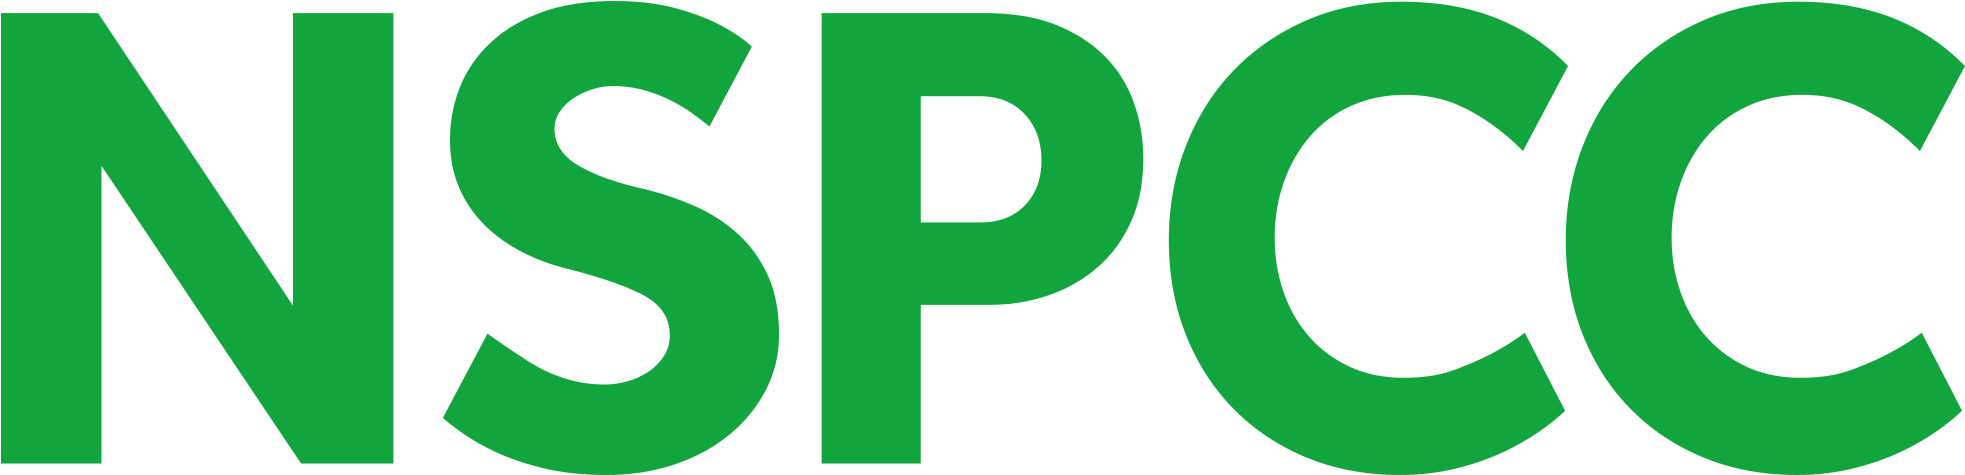 Nspcc Online Logo Rgb Colour - National Society For The Prevention Of Cruelty (1972x484)